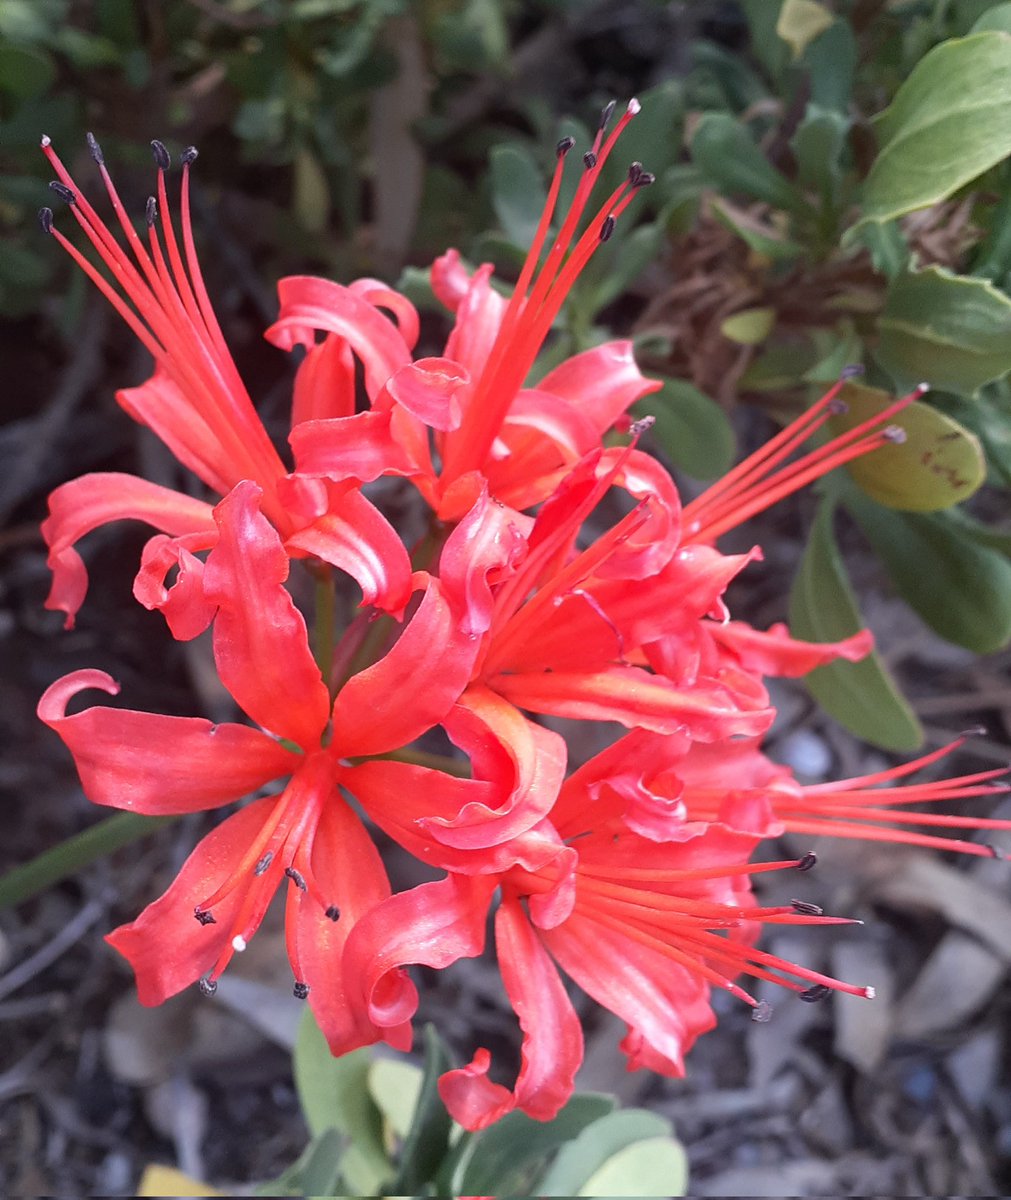 Another day another beautiful Nerine. 🌸 This one was given to me by an elderly neighbour and is bomb-proof! #GardeningX #Flowers #FlowersOfTwitter #flowersmakeeverythingbetter #writerslife